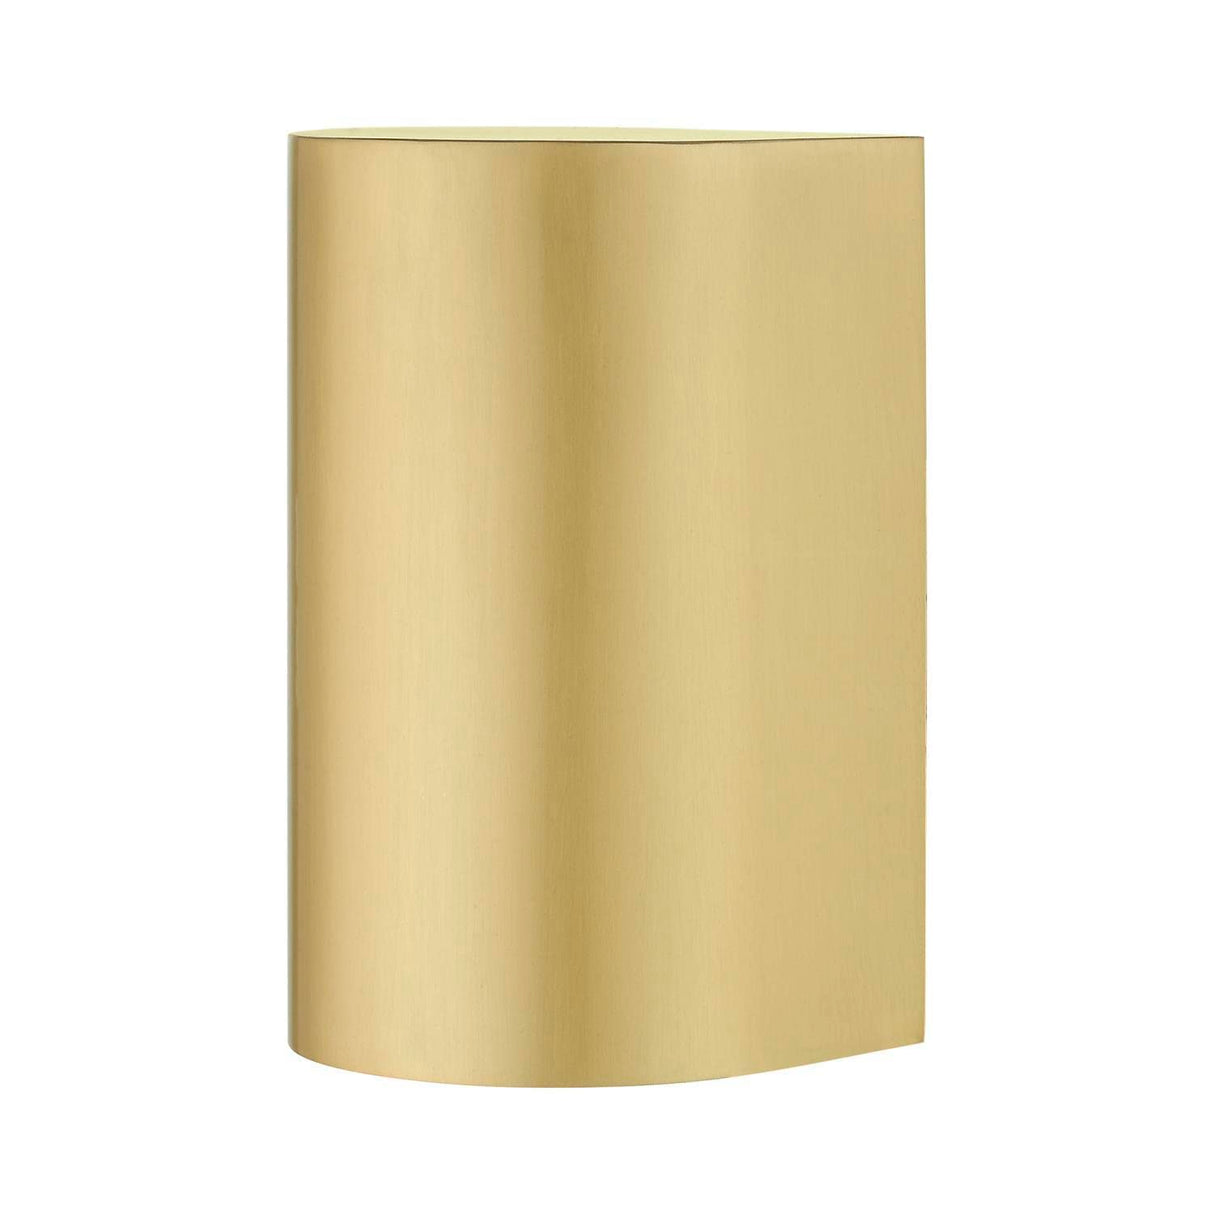 Livex Lighting 22061-32 Bond - 1 Light Small Outdoor ADA Wall Sconce in Urban Style-7 Inches Tall and 4.25 Inches Wide, Finish Color: Satin Gold